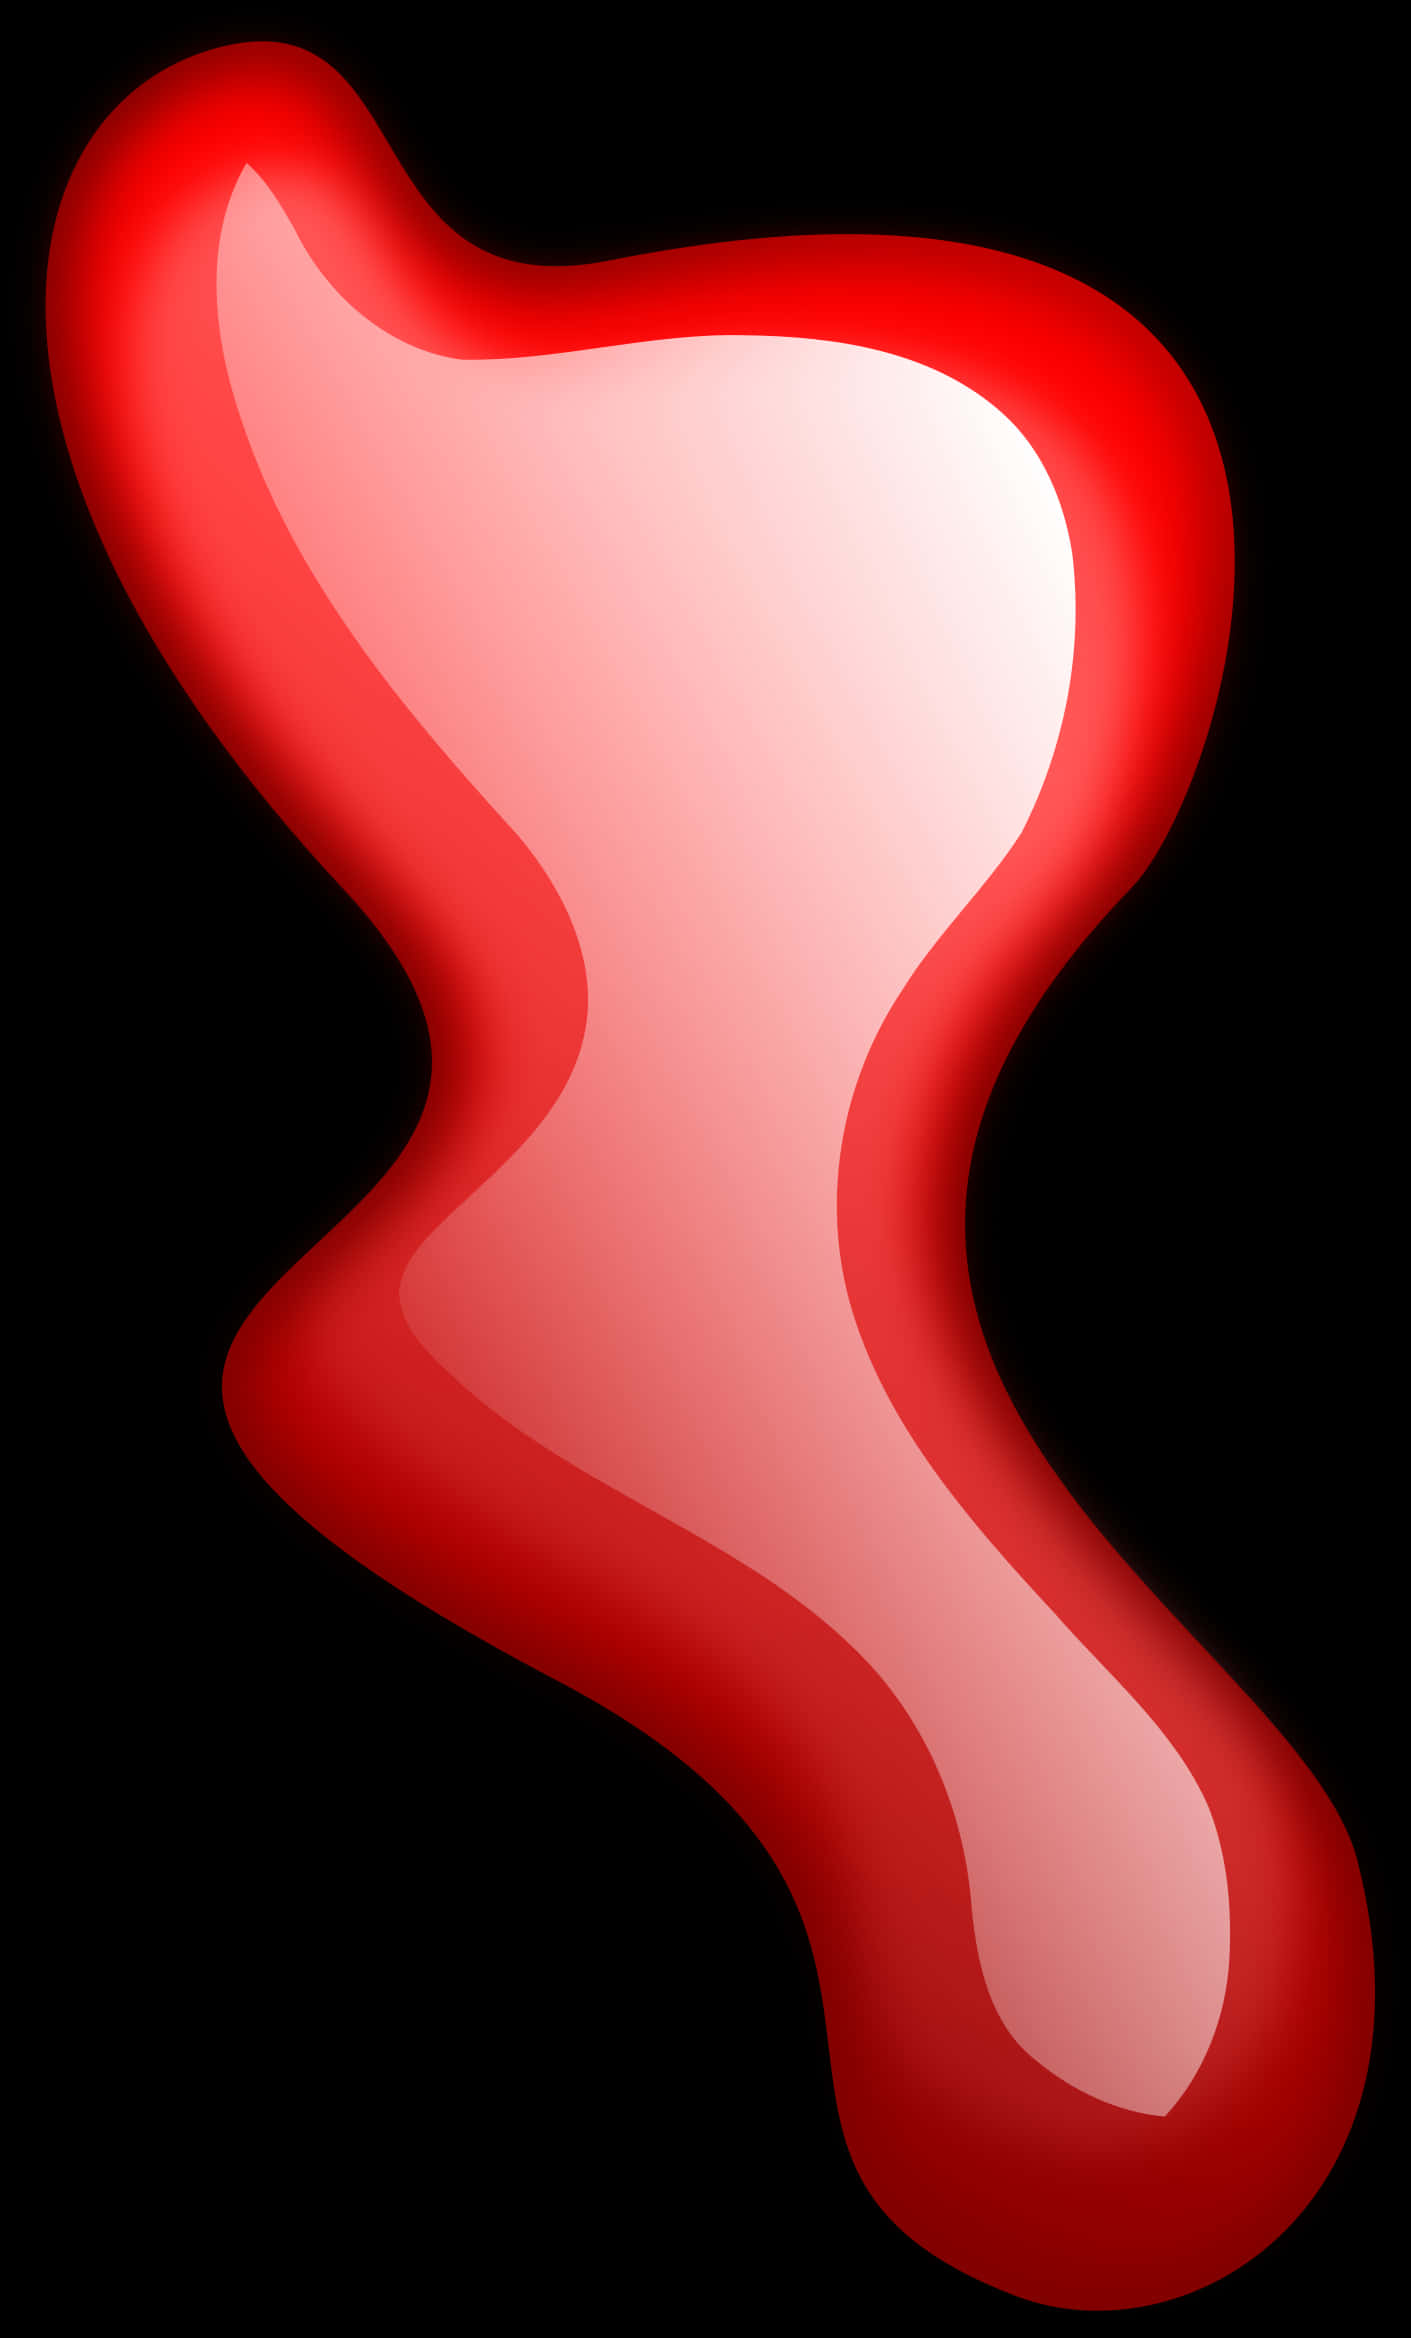 Abstract Blood Drop Illustration PNG